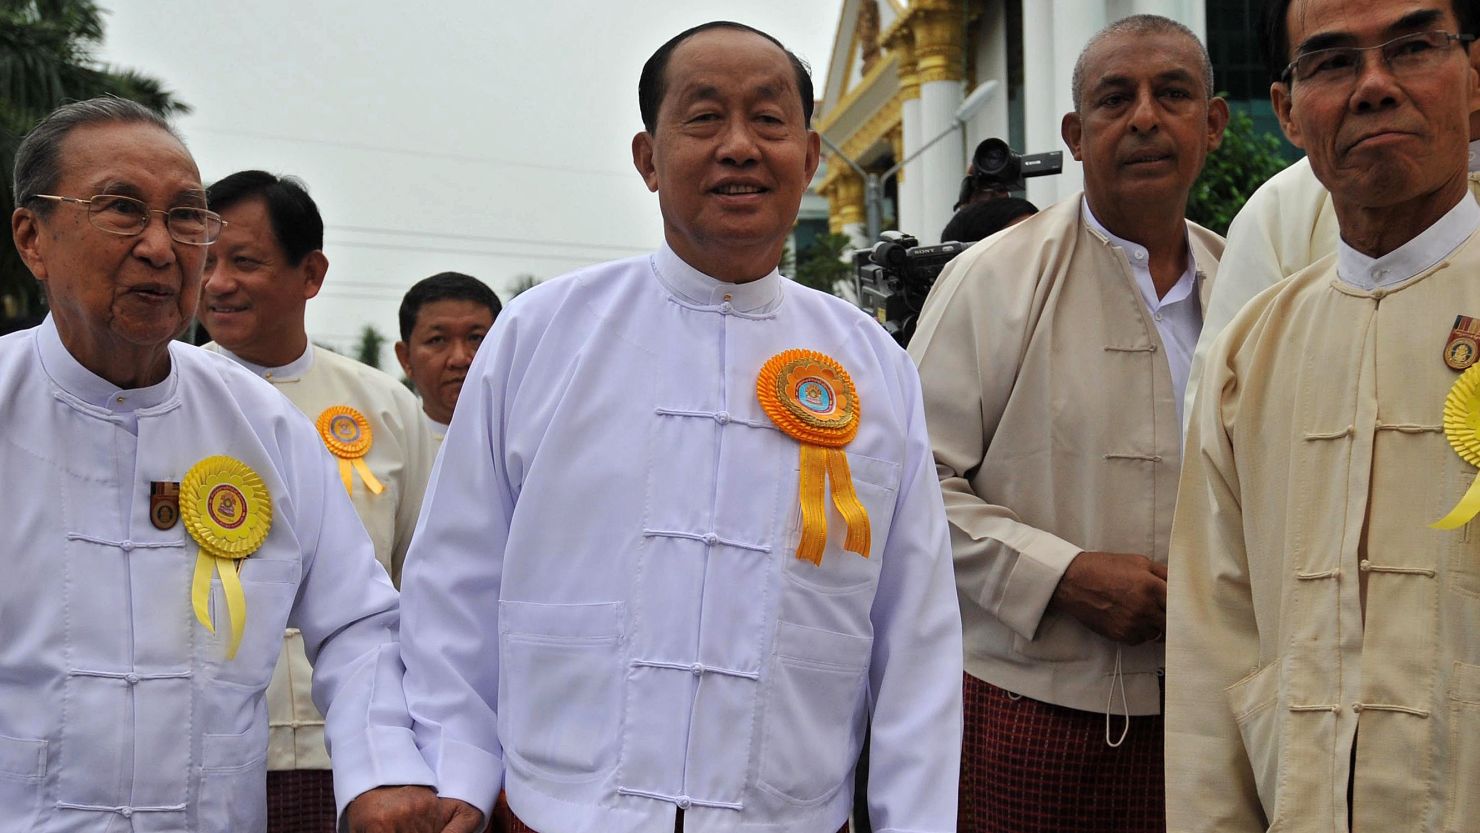 Myanmar's vice president Tin Aung Myint Oo (C) has resigned as of July 1.